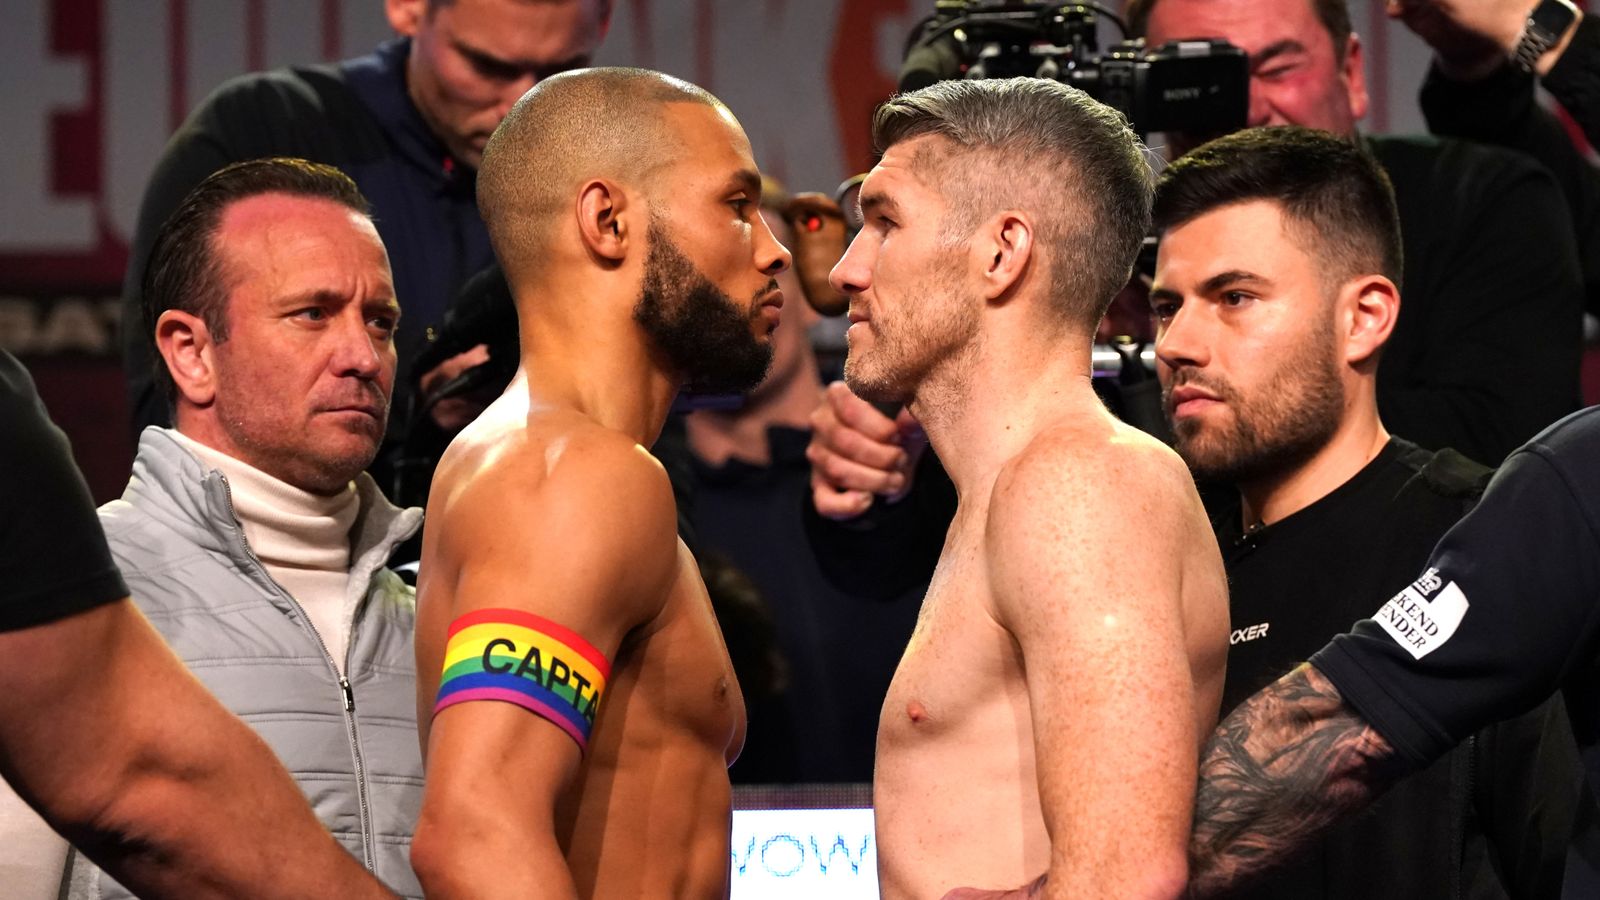 skysports chris eubank jr liam smith 6030513 Chris Eubank Jr and Liam Smith make weight in Manchester